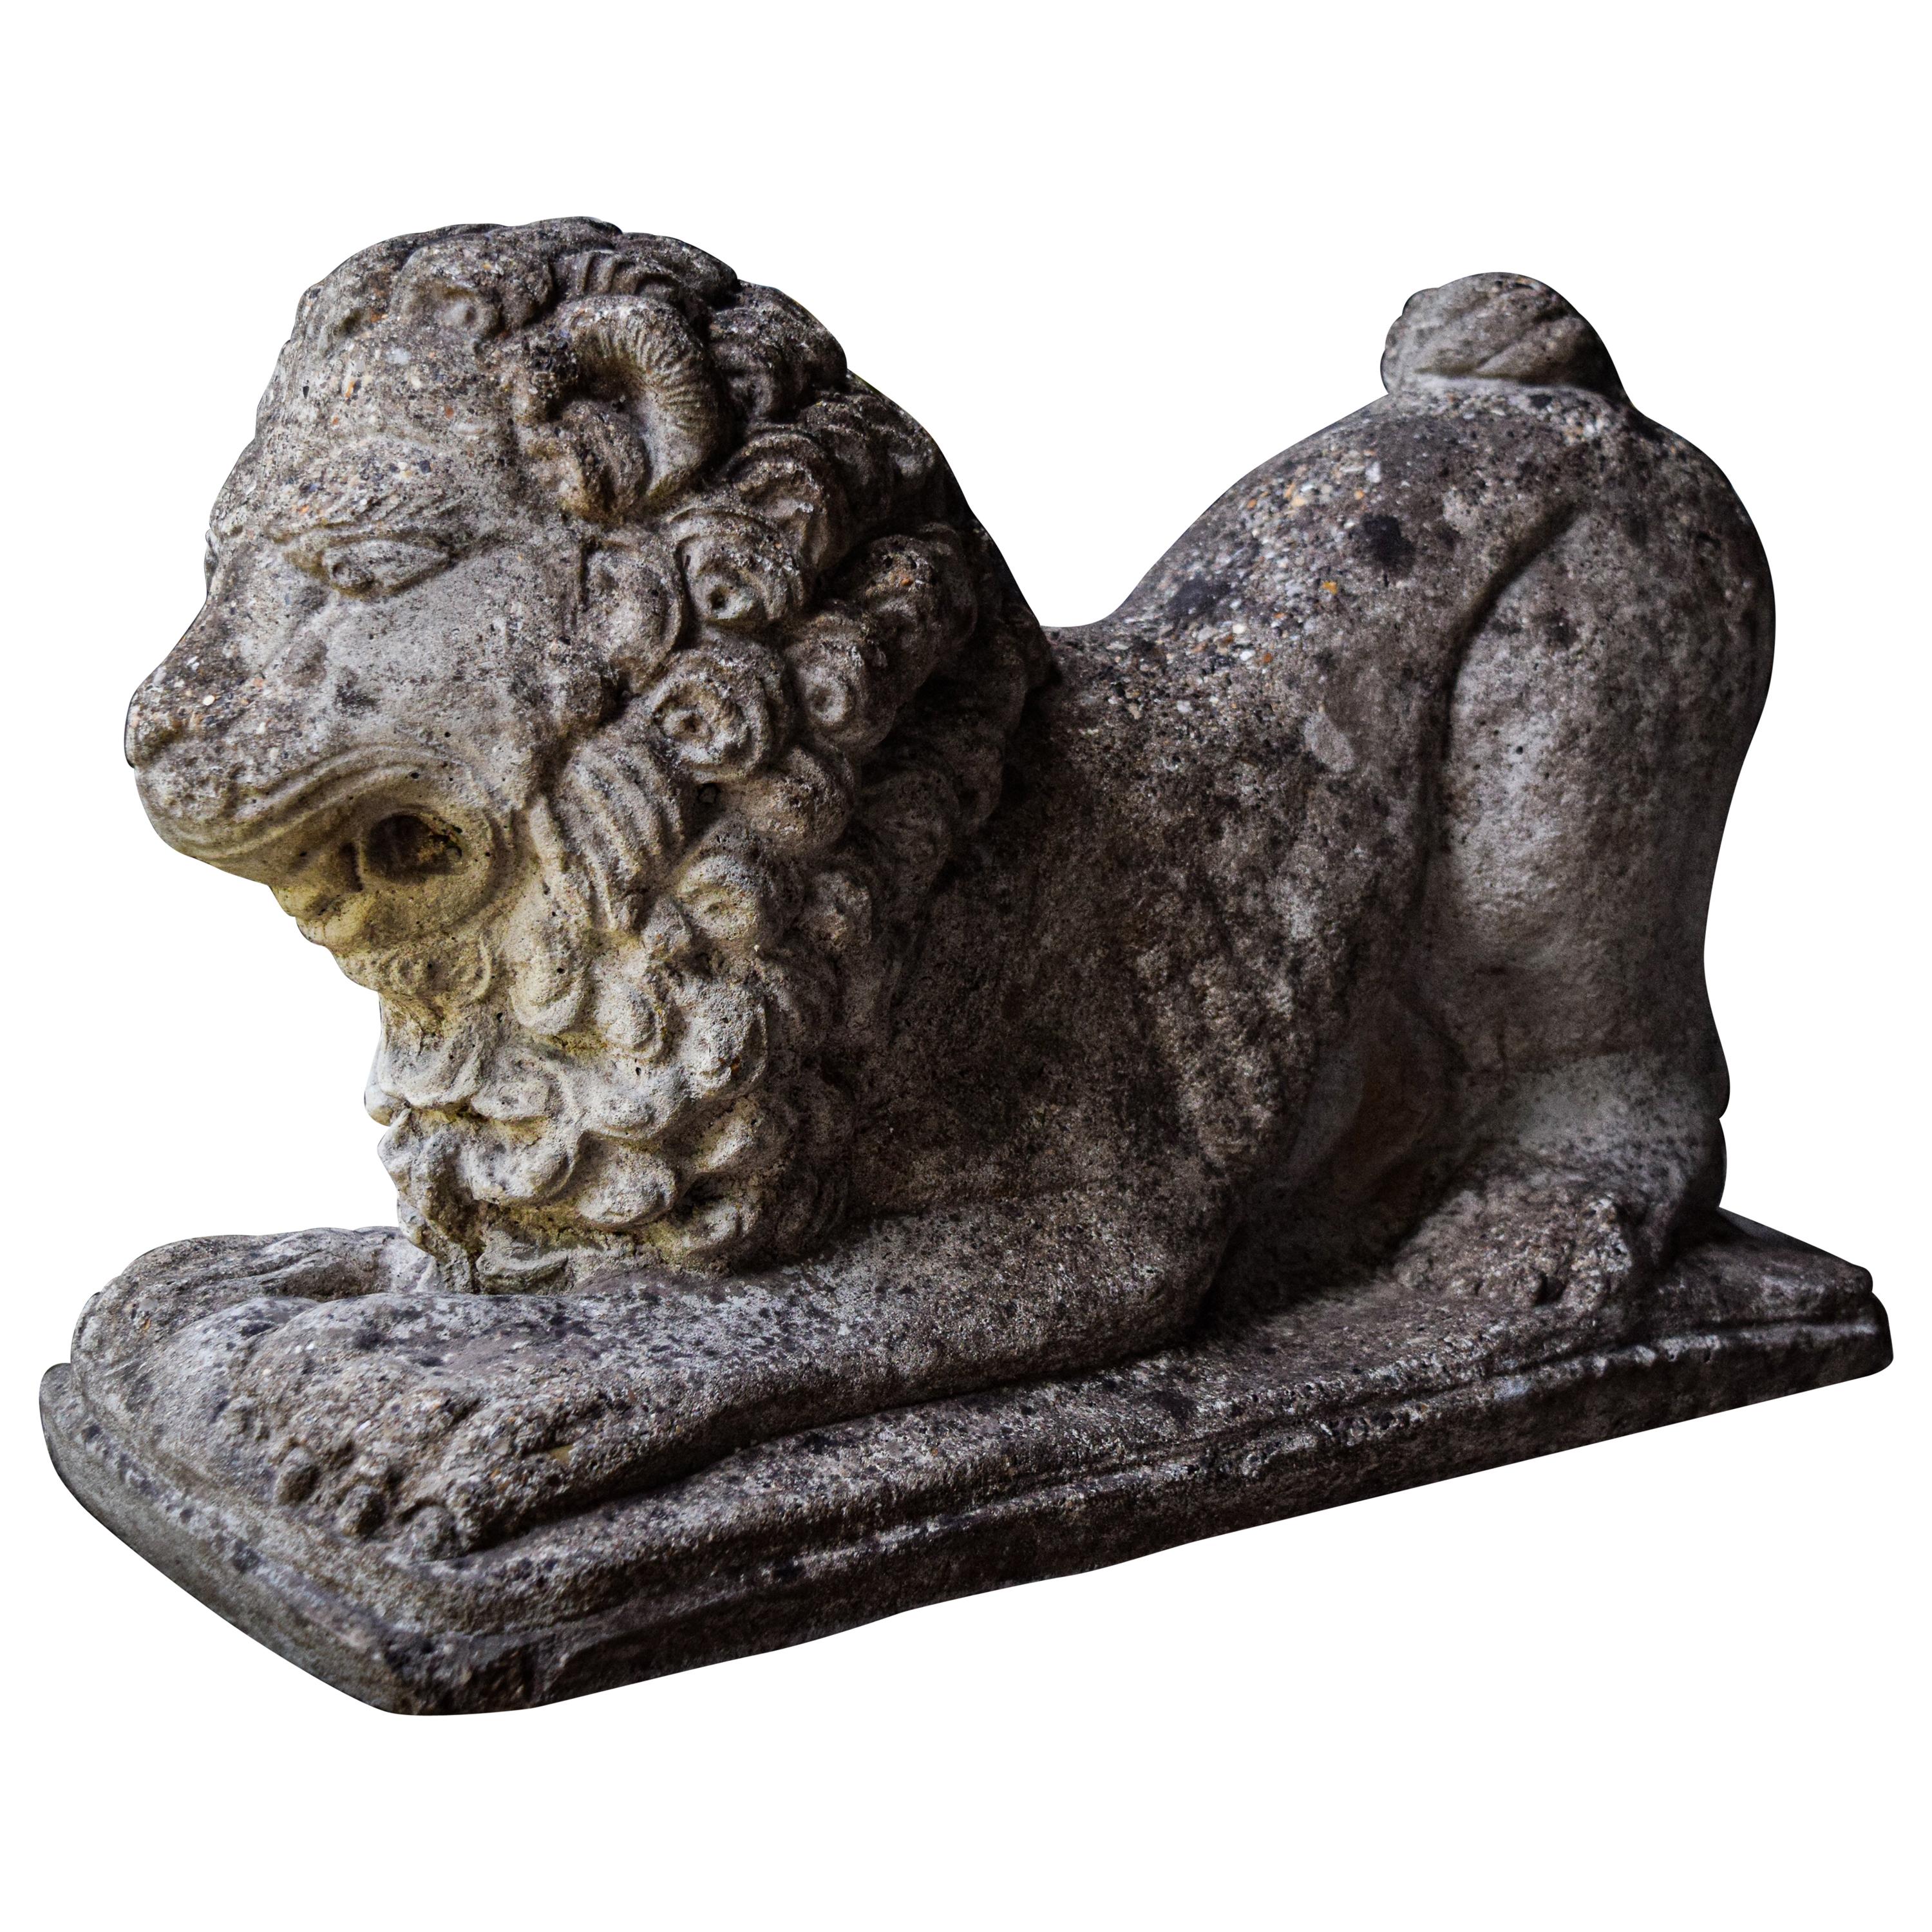 Lion Statues in Repose